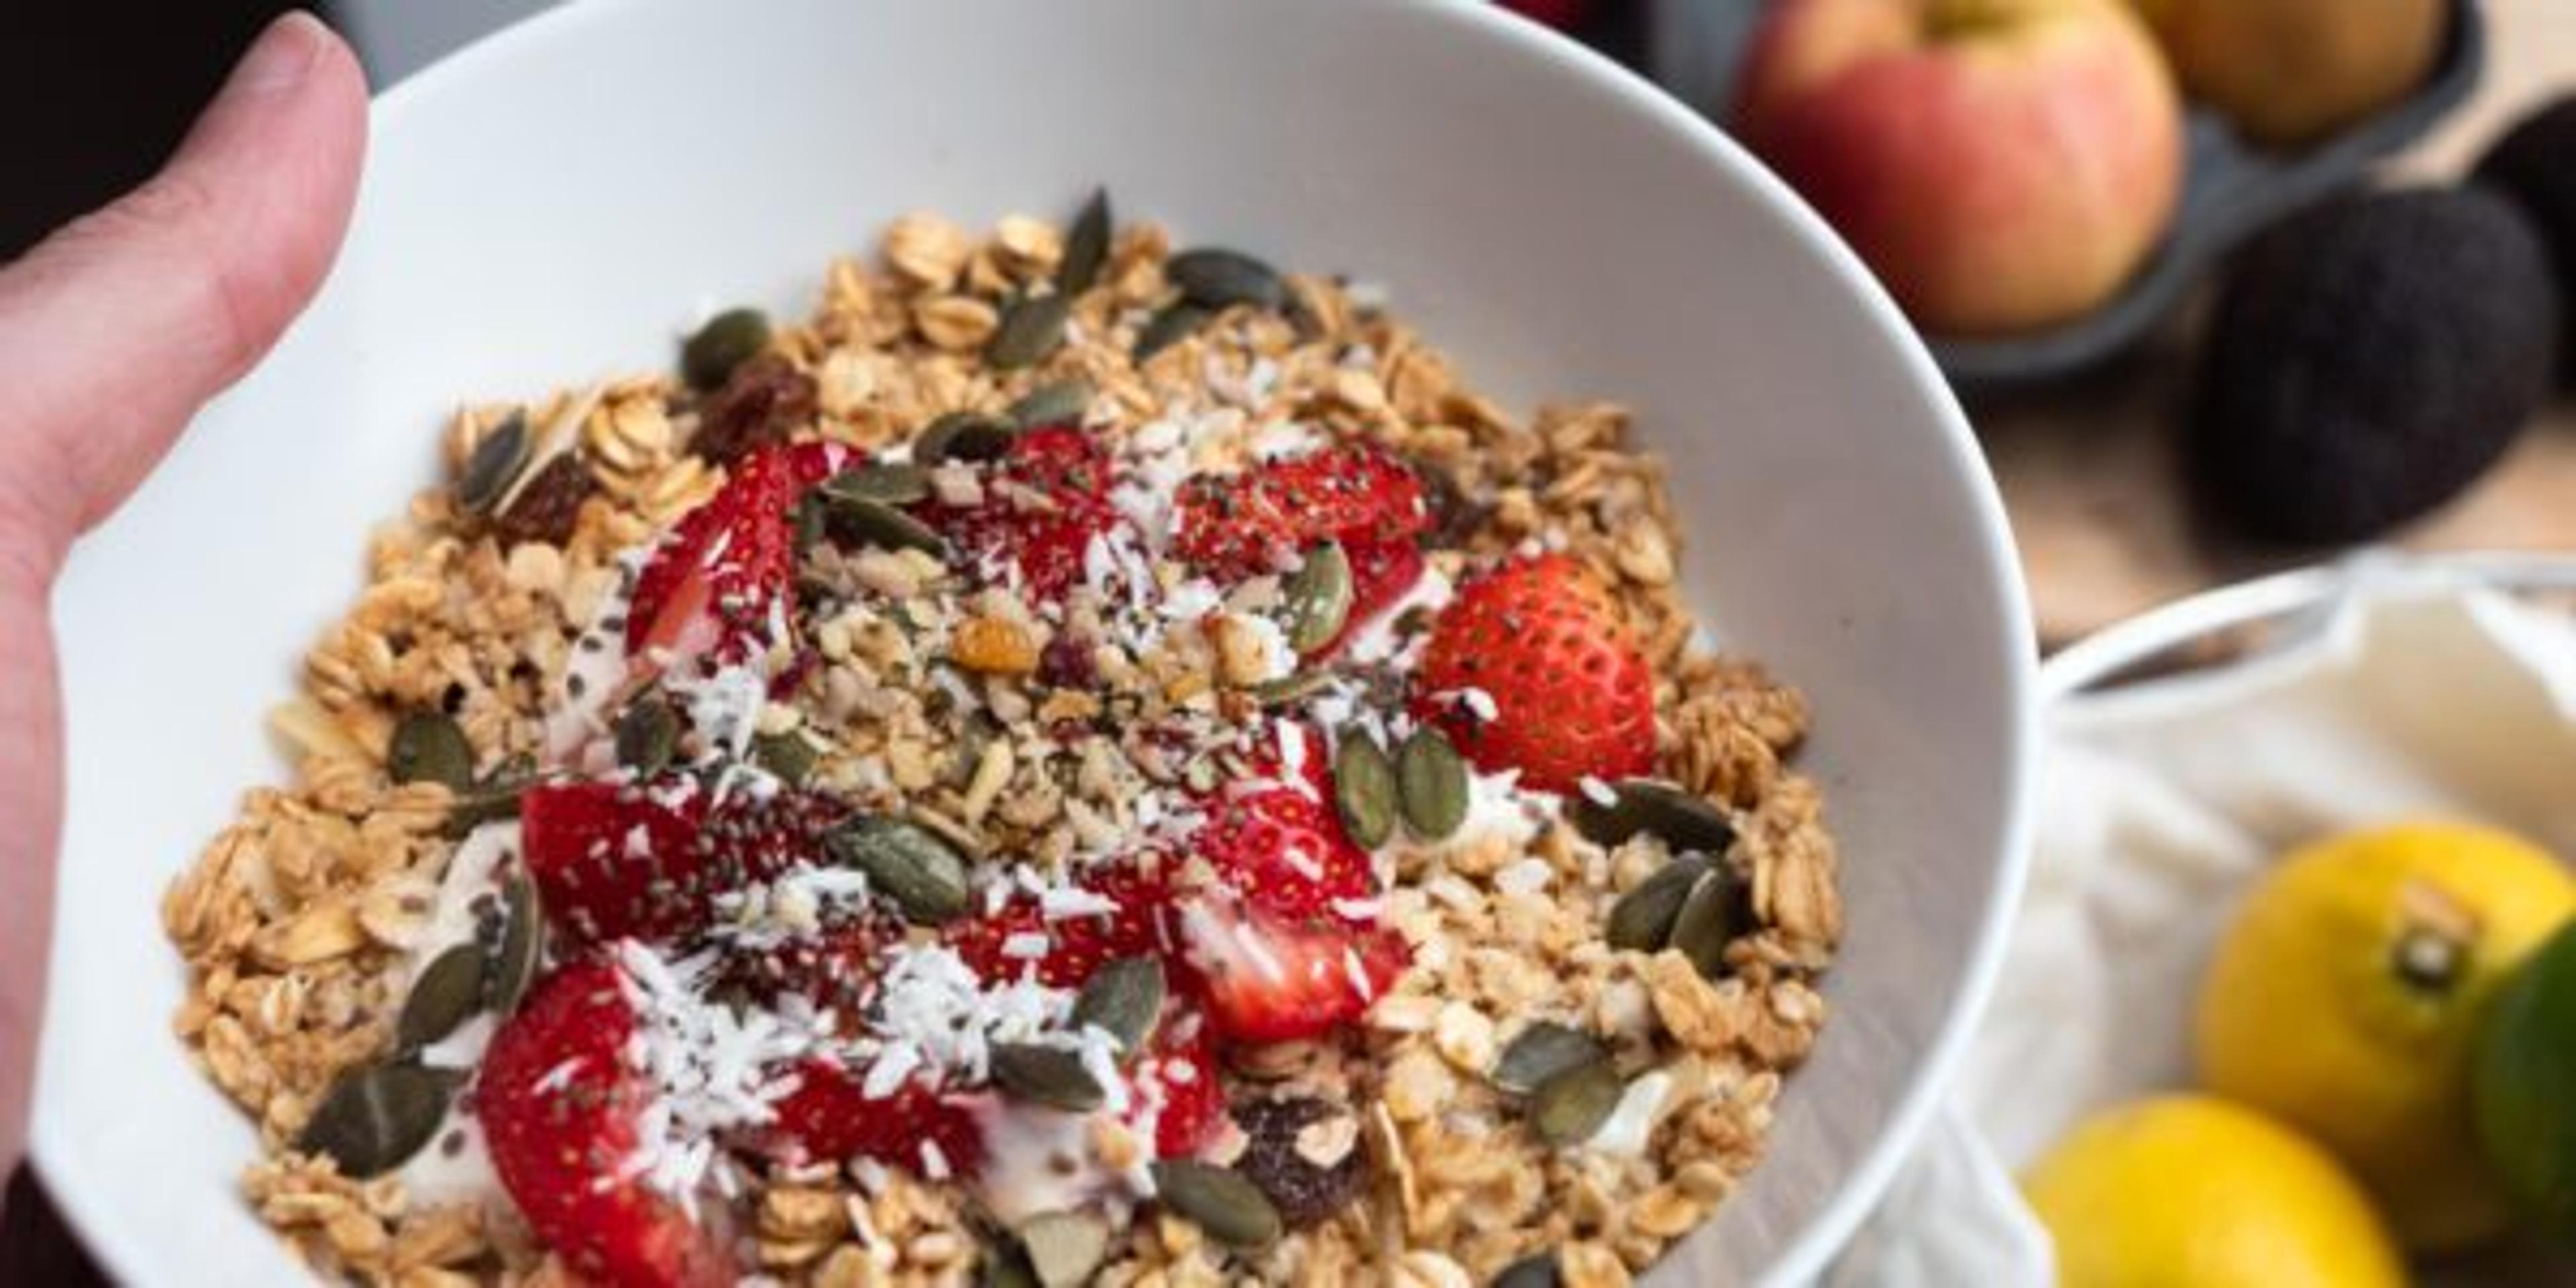 Bowl of freshly made granola with fruit and nuts